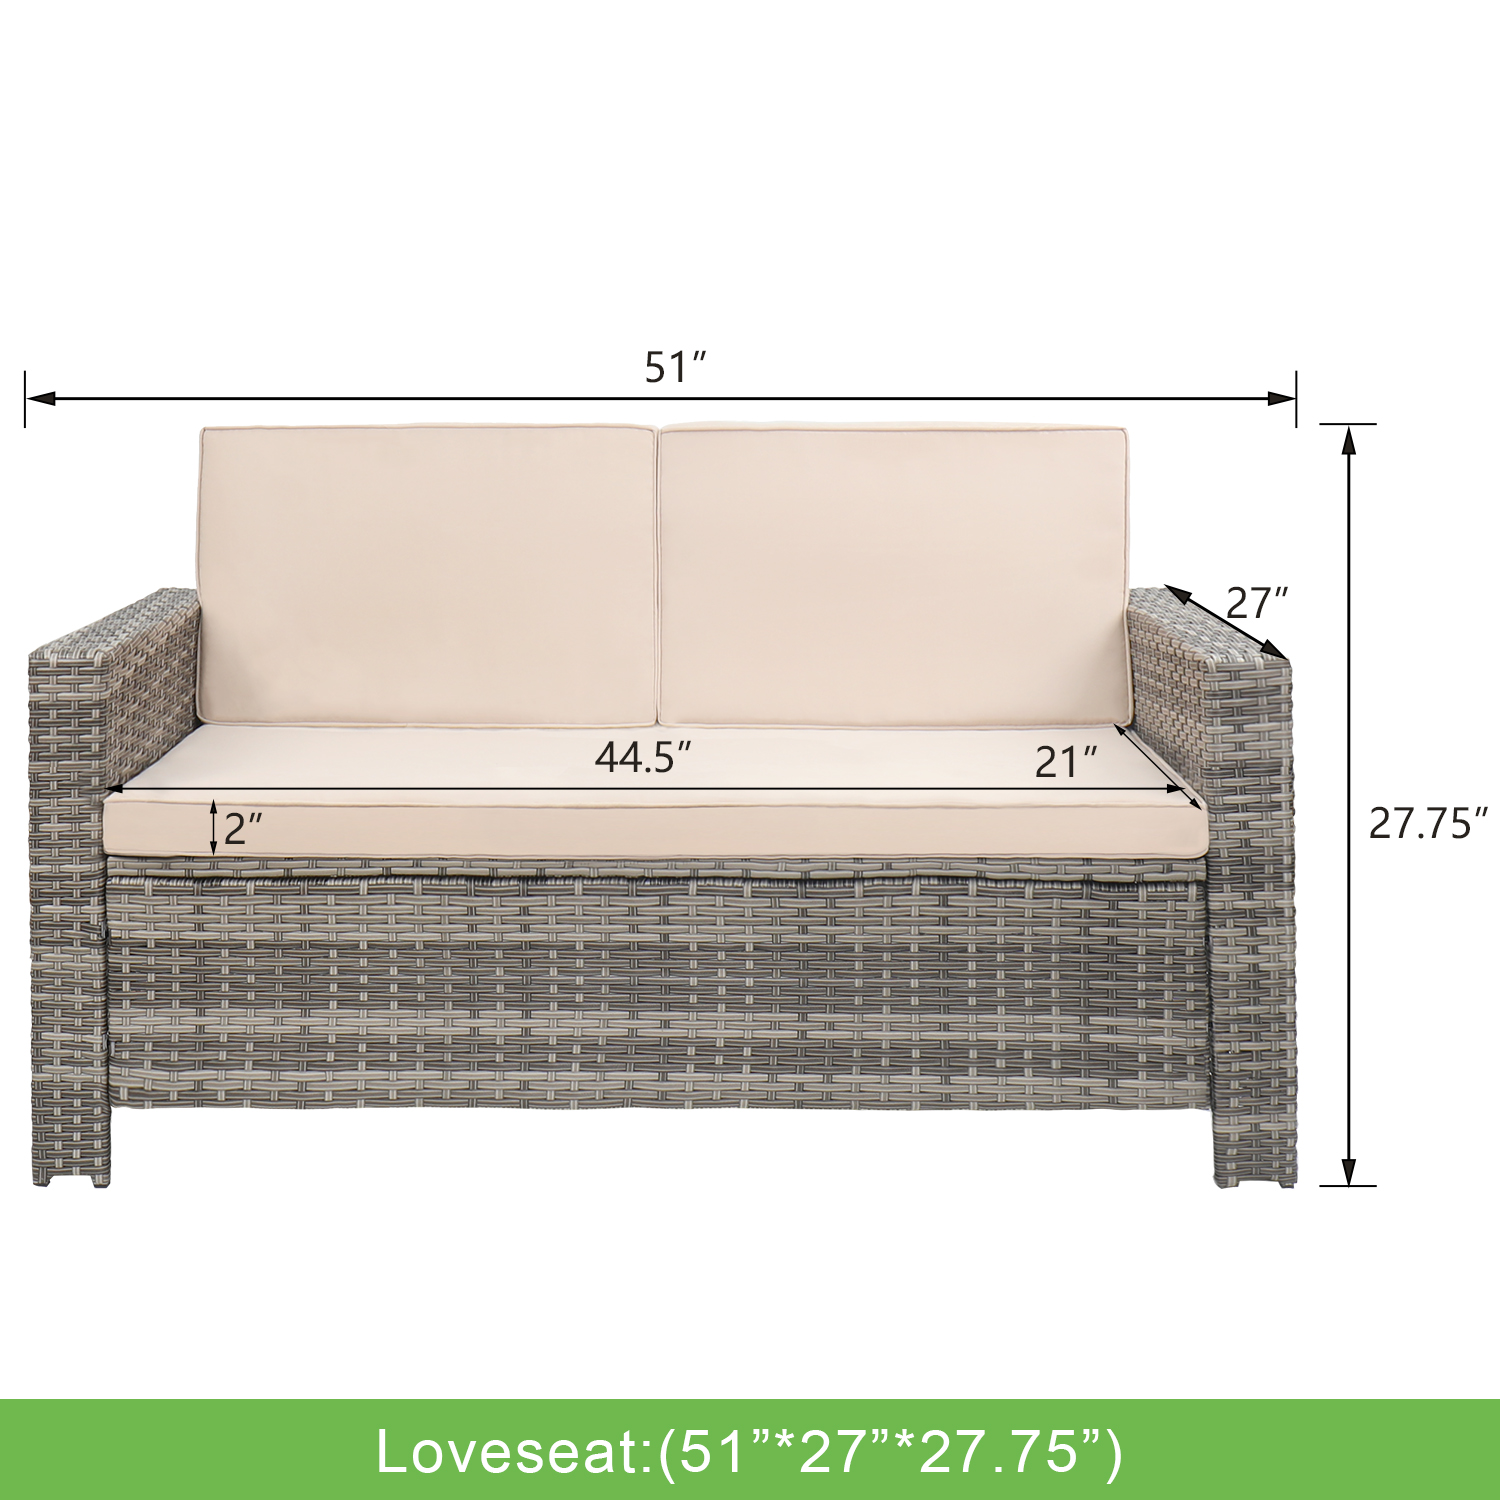 LACOO 4-Piece Grey Wicker Outdoor Patio Conversation Set with Beige Cushions - image 3 of 4